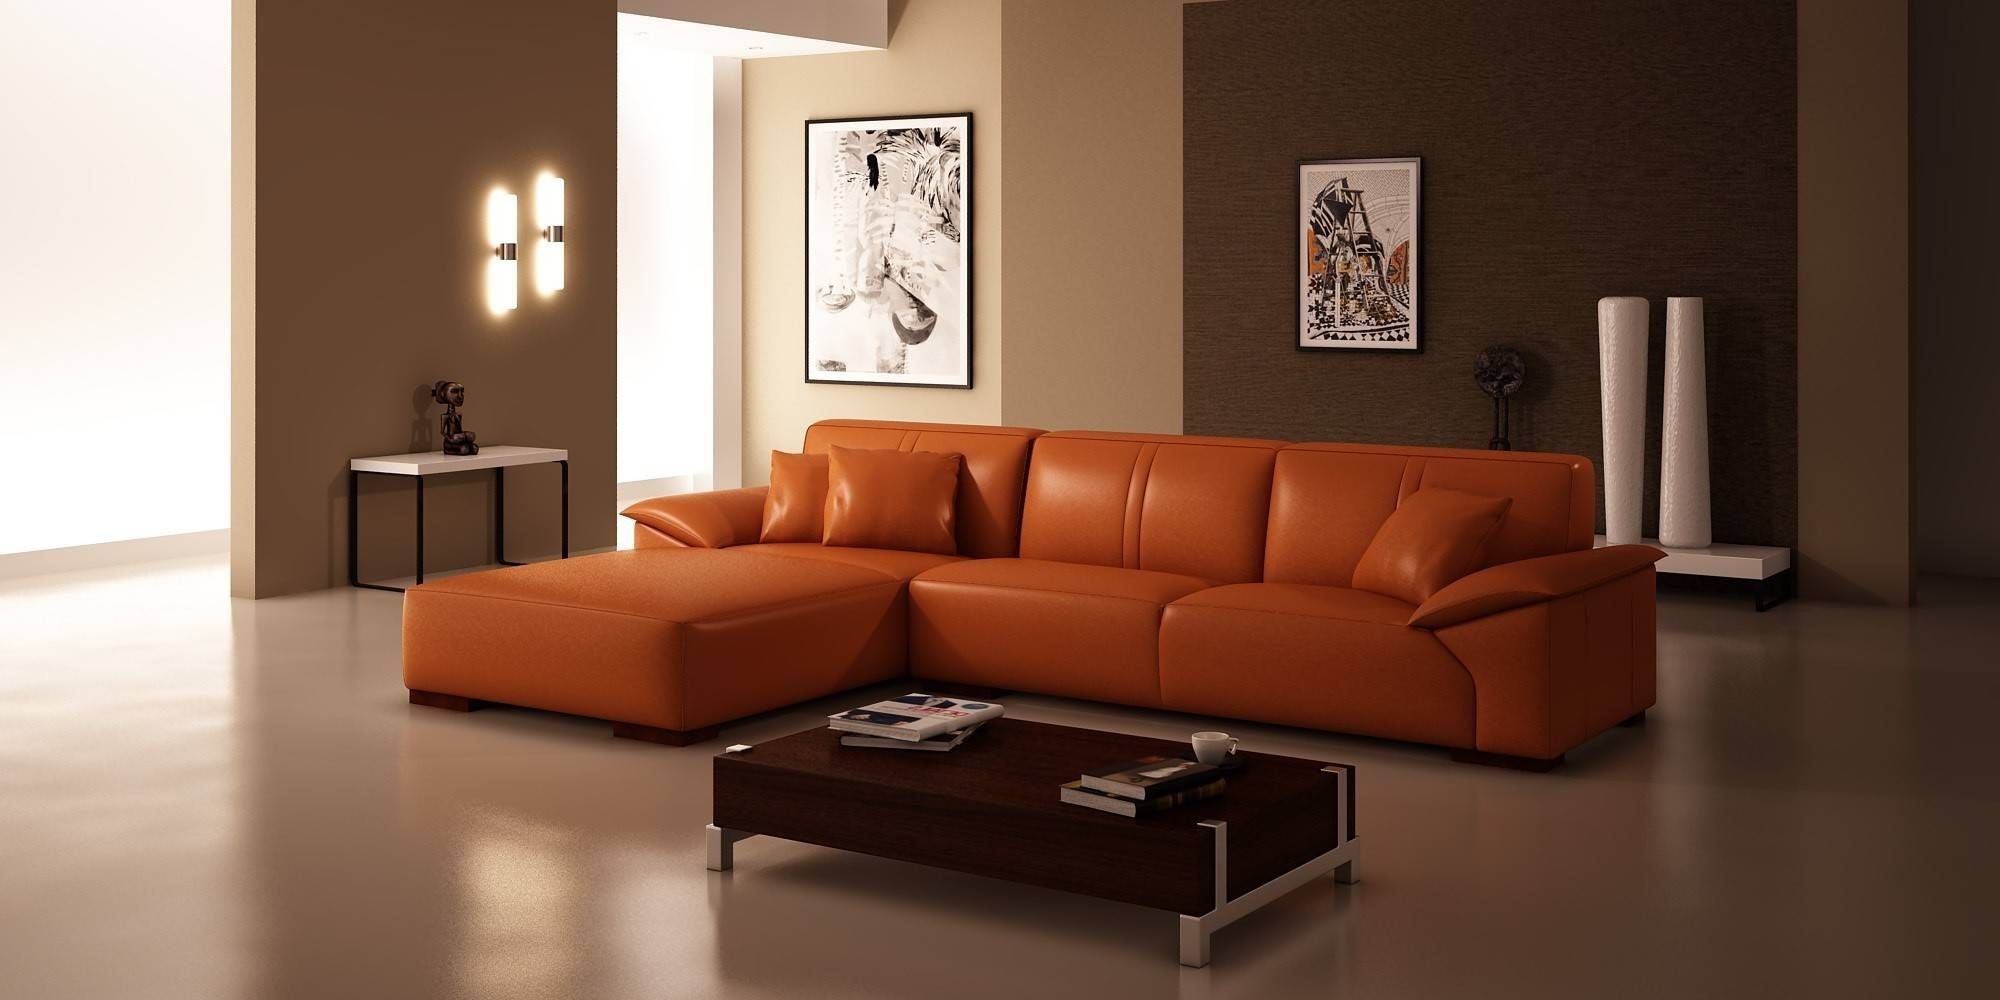 Featured Photo of The 15 Best Collection of Burnt Orange Living Room Sofas